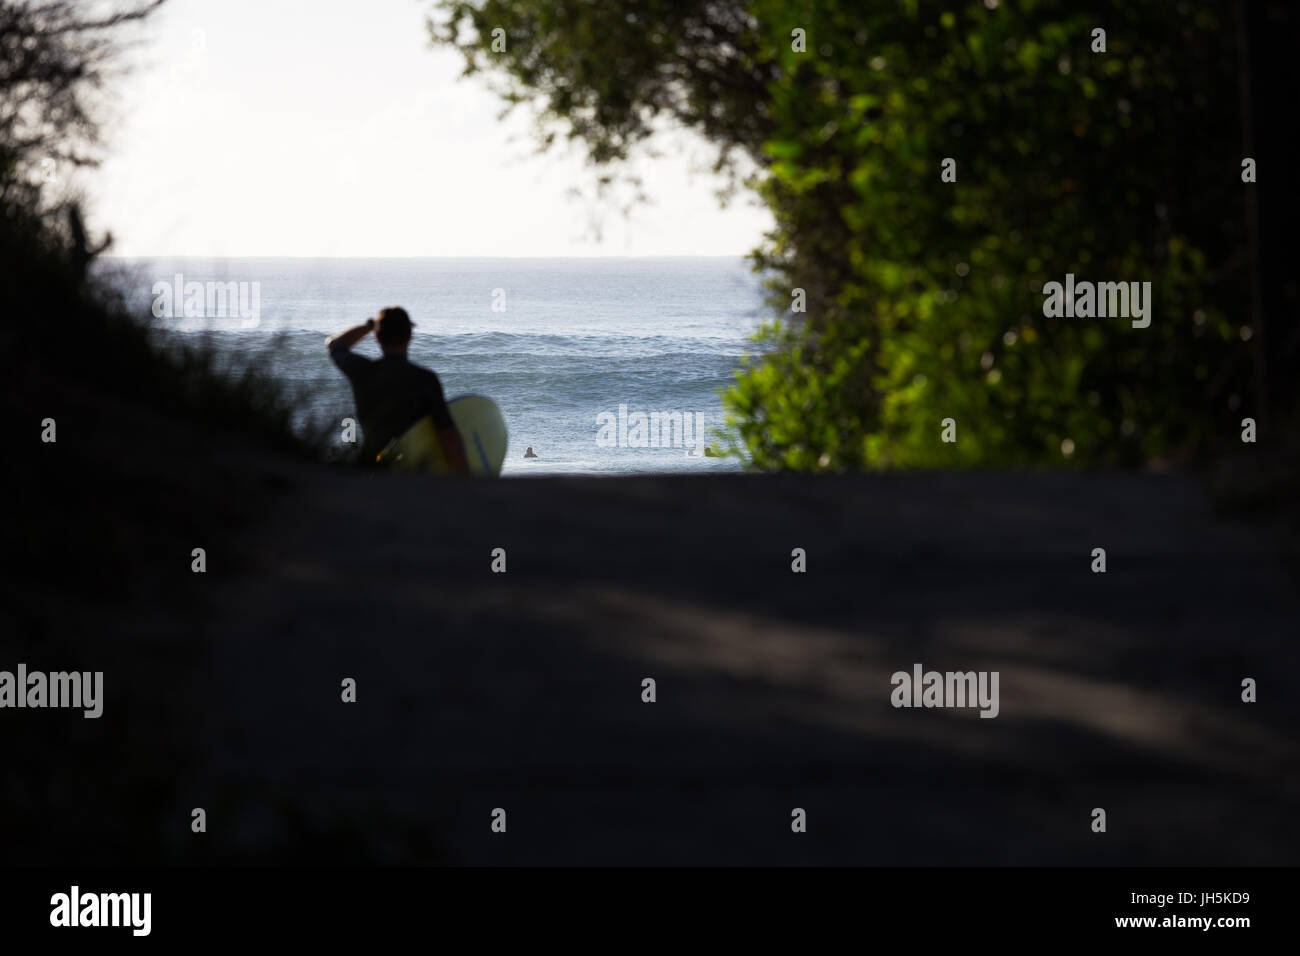 A surfer with surfboard under arm checks the morning surf at a scenic beach in Australia. Stock Photo